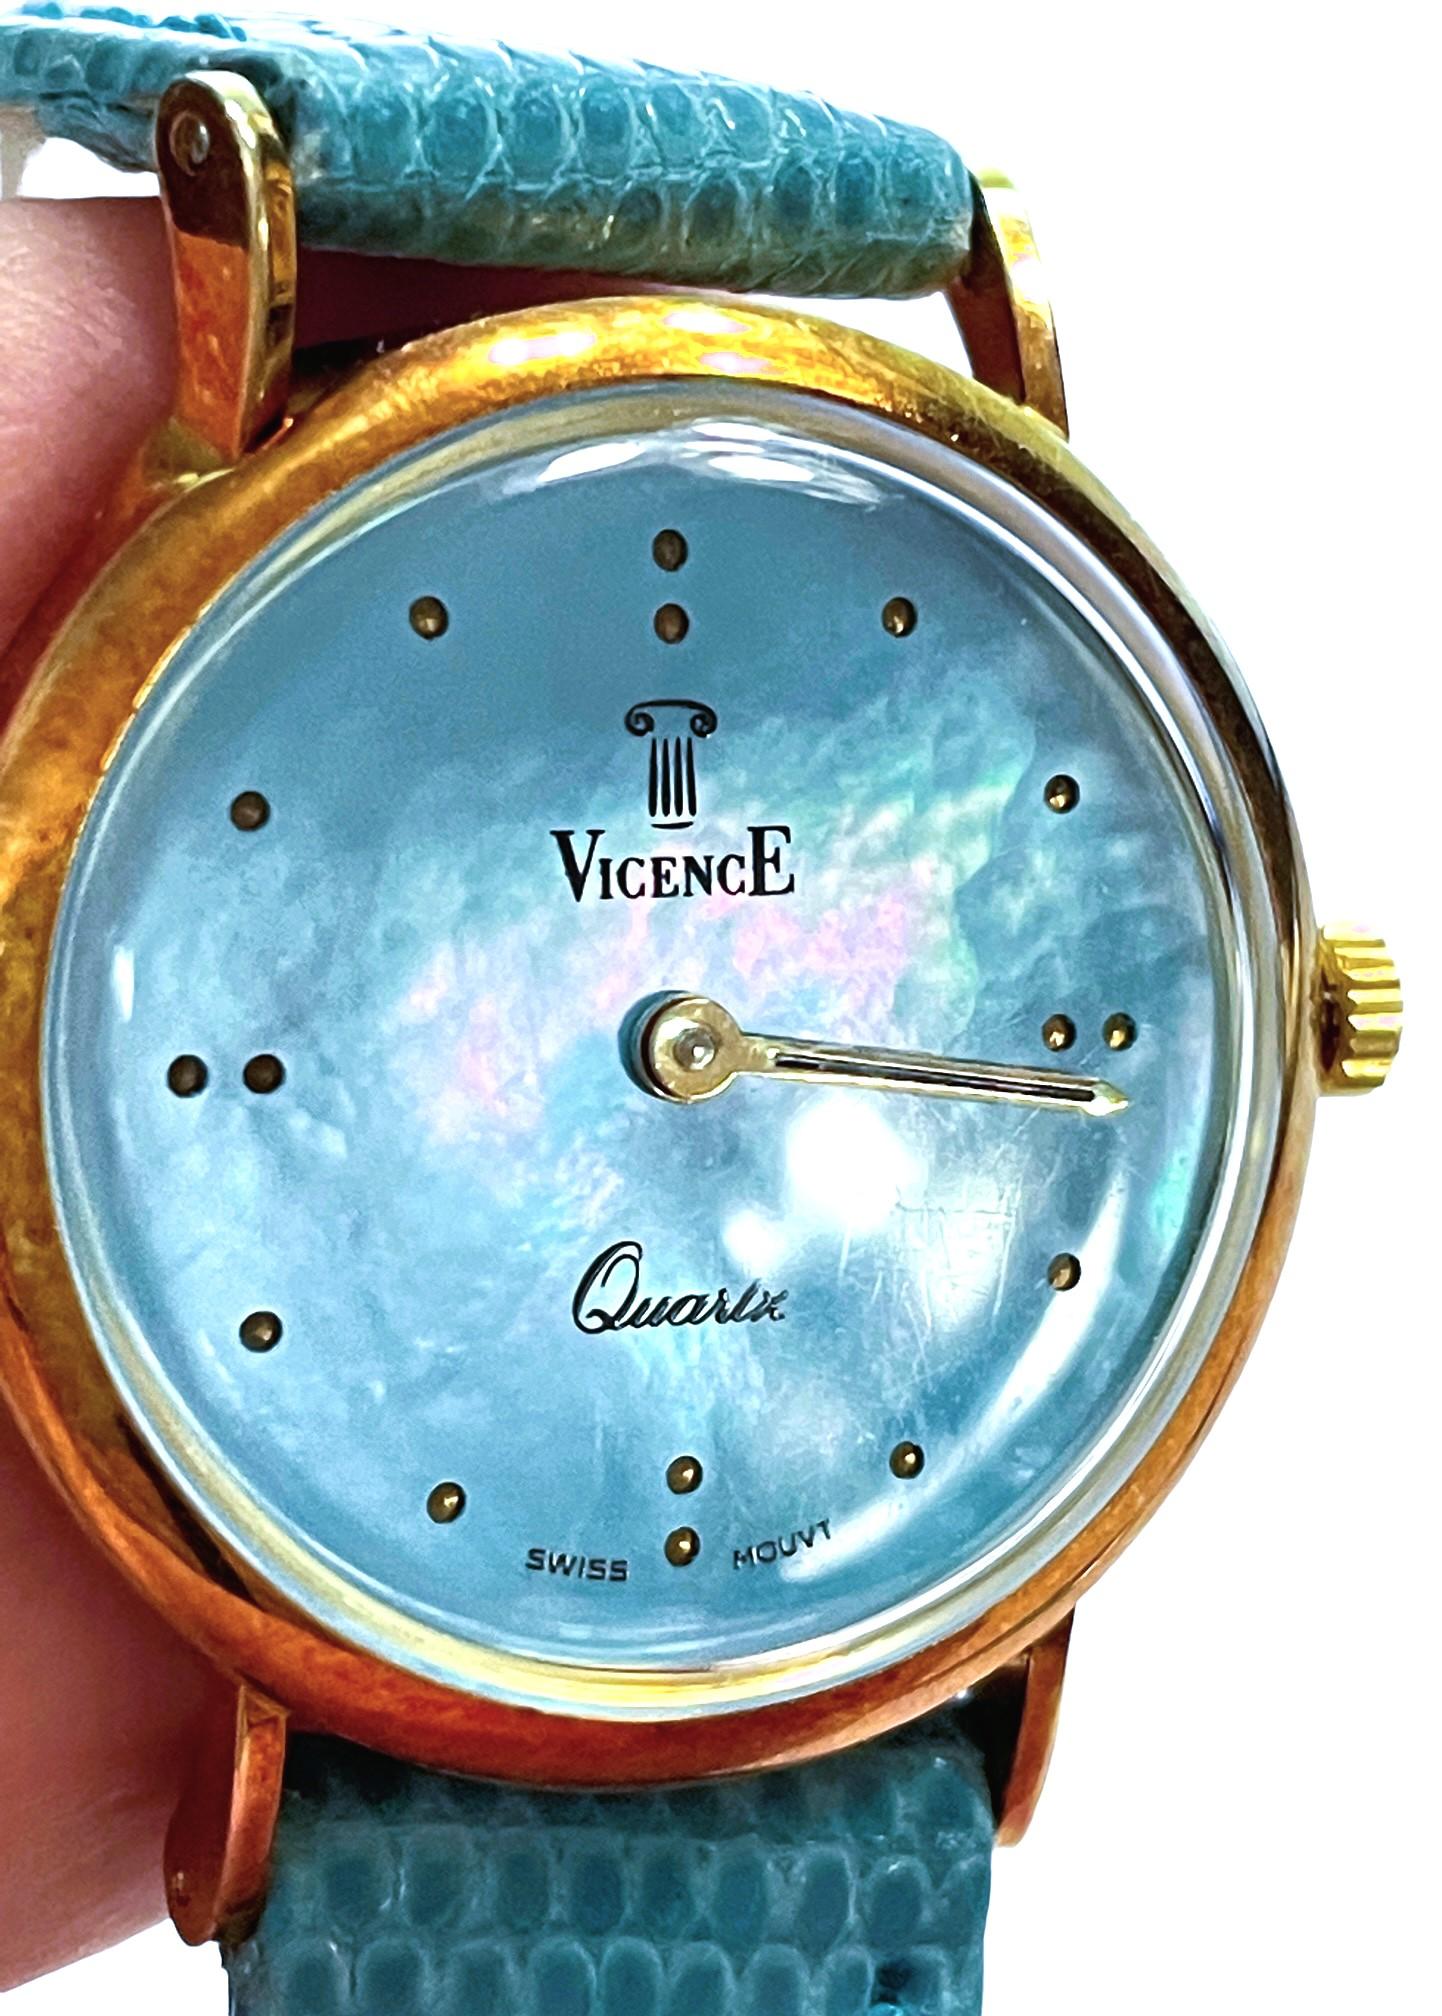 14k Yellow Gold Vicense Blue Pearlized Ladies Quartz Watch with Leather Band For Sale 5